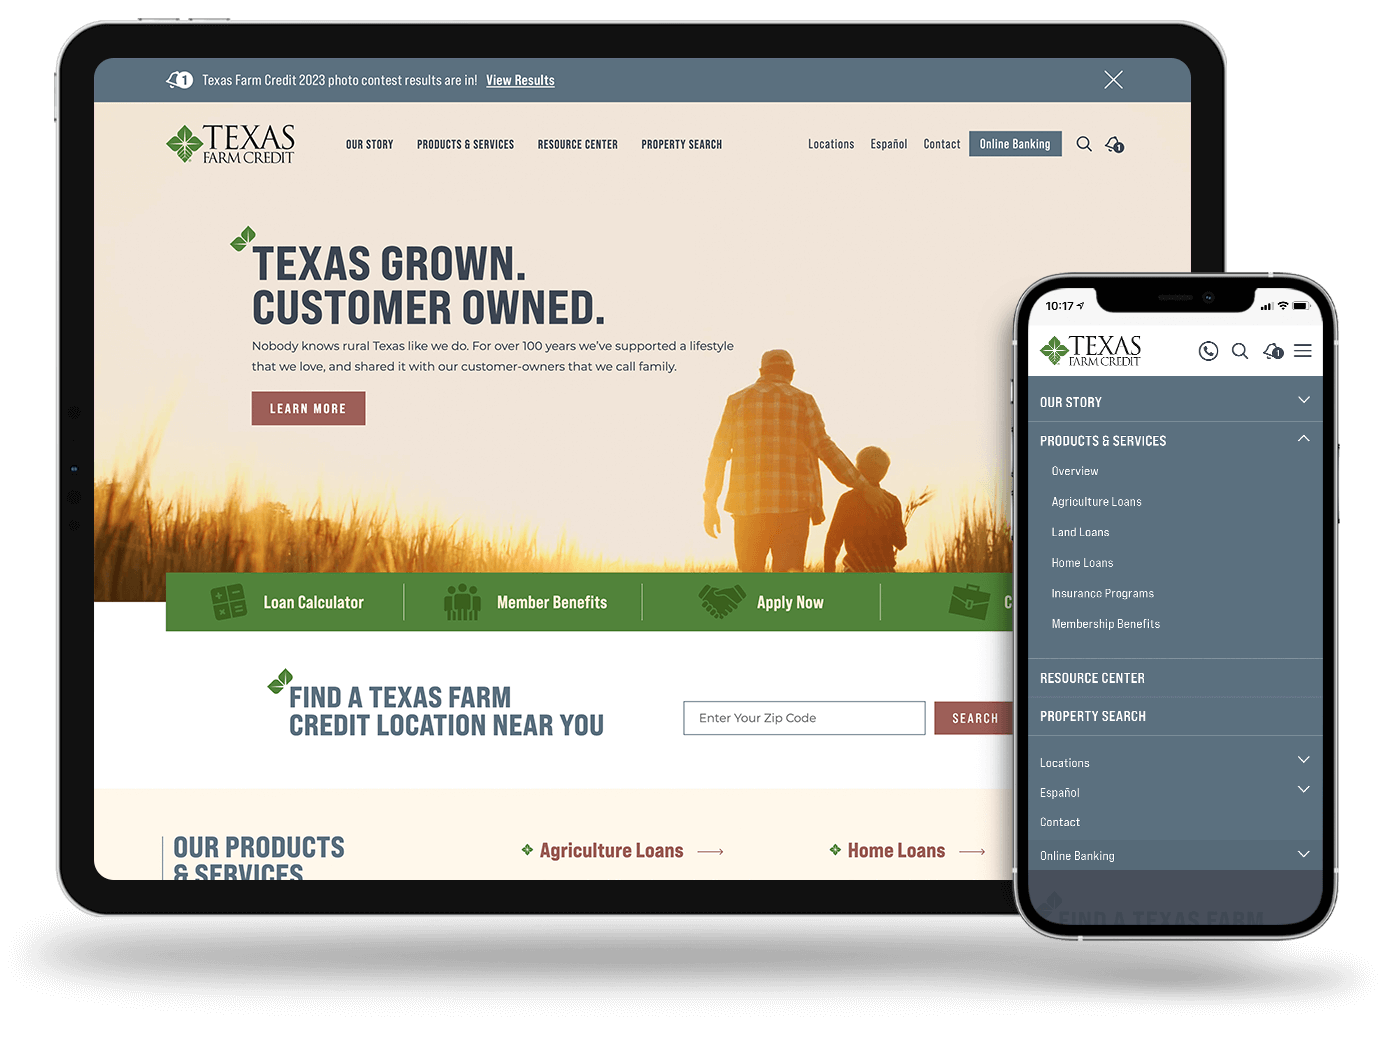 Tablet view of the Texas Farm Credit homepage and mobile view of the navigation.